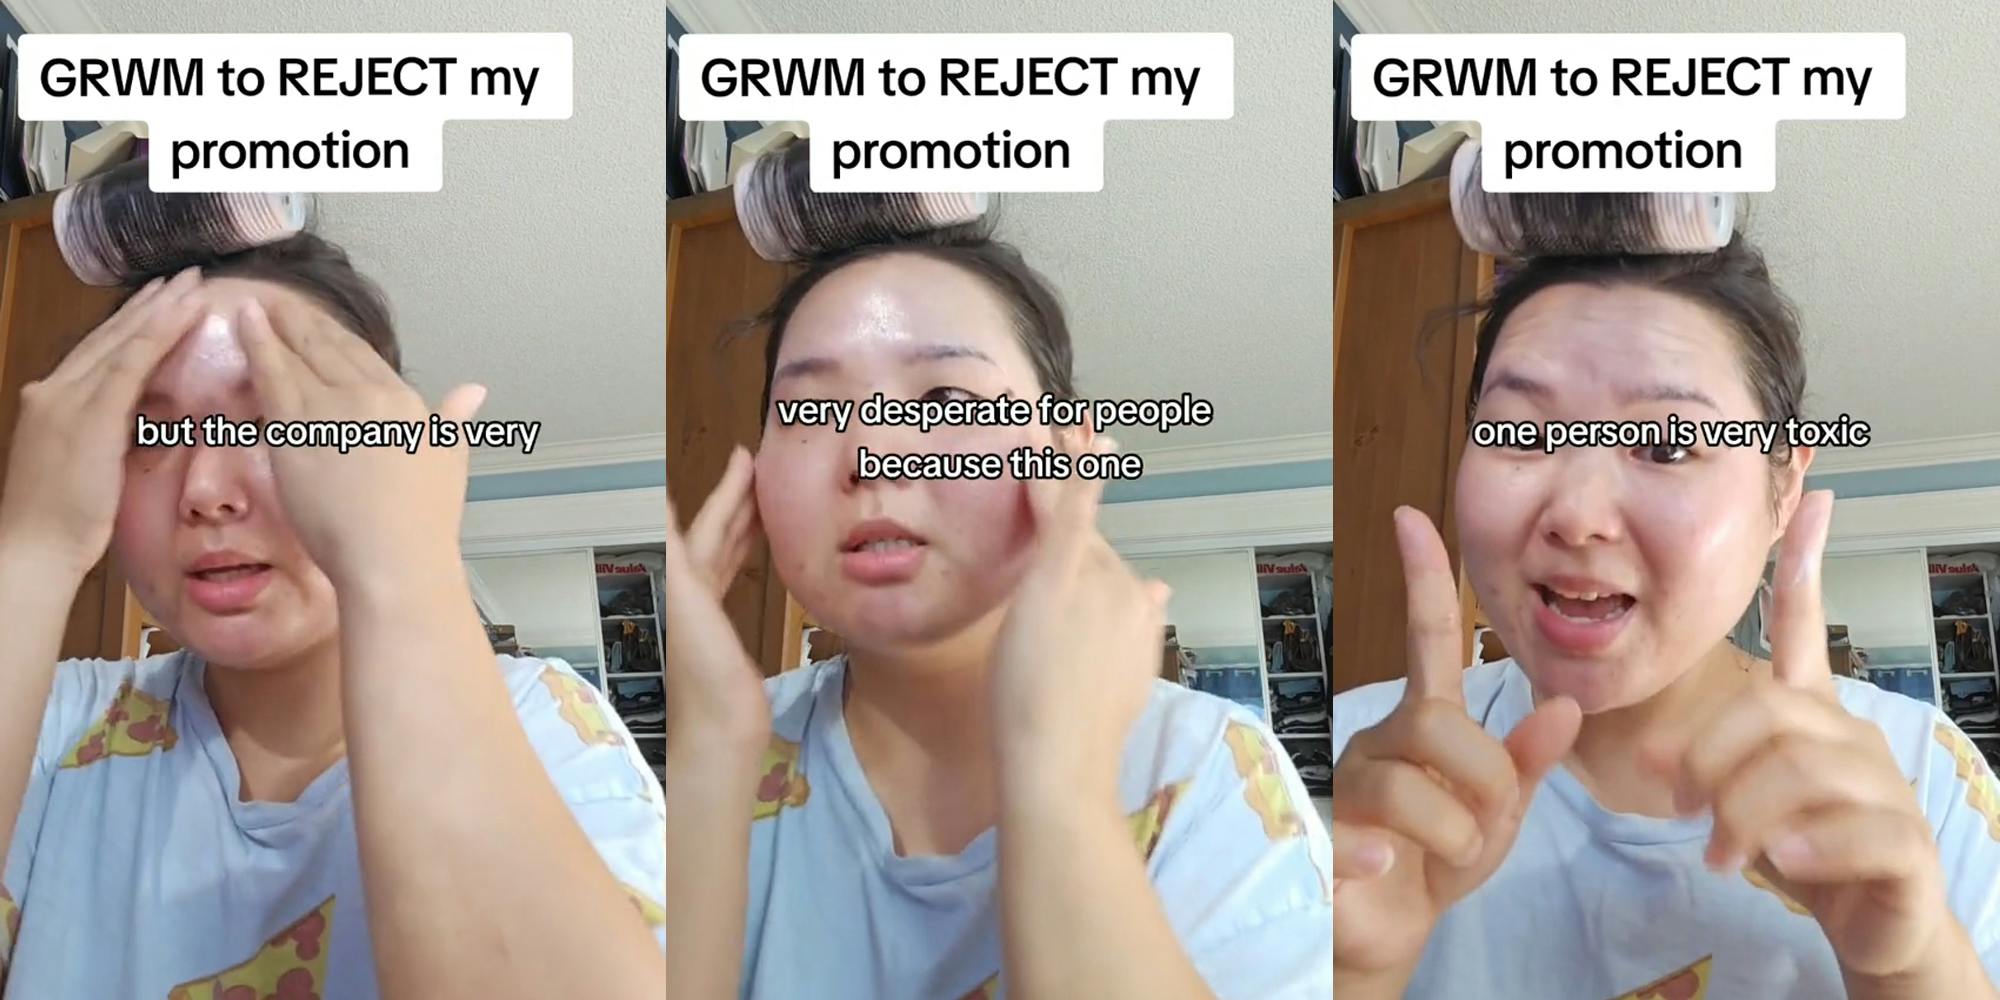 woman applying skincare products with caption "GRWM to REJECT my promotion but the company is very" (l) woman applying skincare products with caption "GRWM to REJECT my promotion very desperate for people because this one" (c) woman applying skincare products with caption "GRWM to REJECT my promotion one person is very toxic" (r)